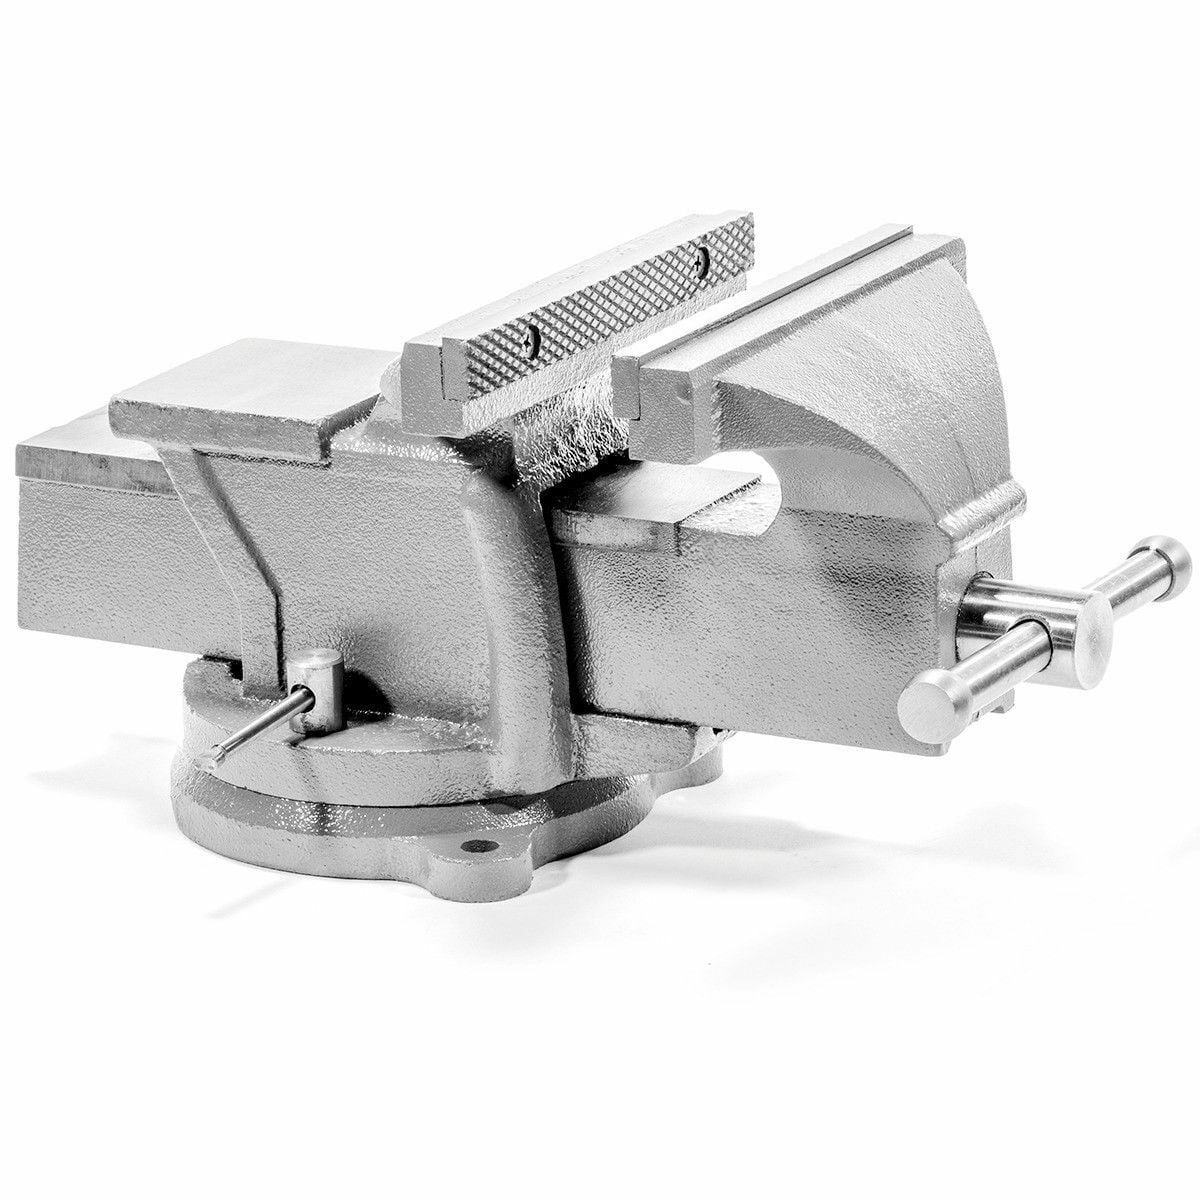 Details about   8 Inch bench vise With Anvil Swivel Locking Base Table Top Clamp Heavy Duty Vice 